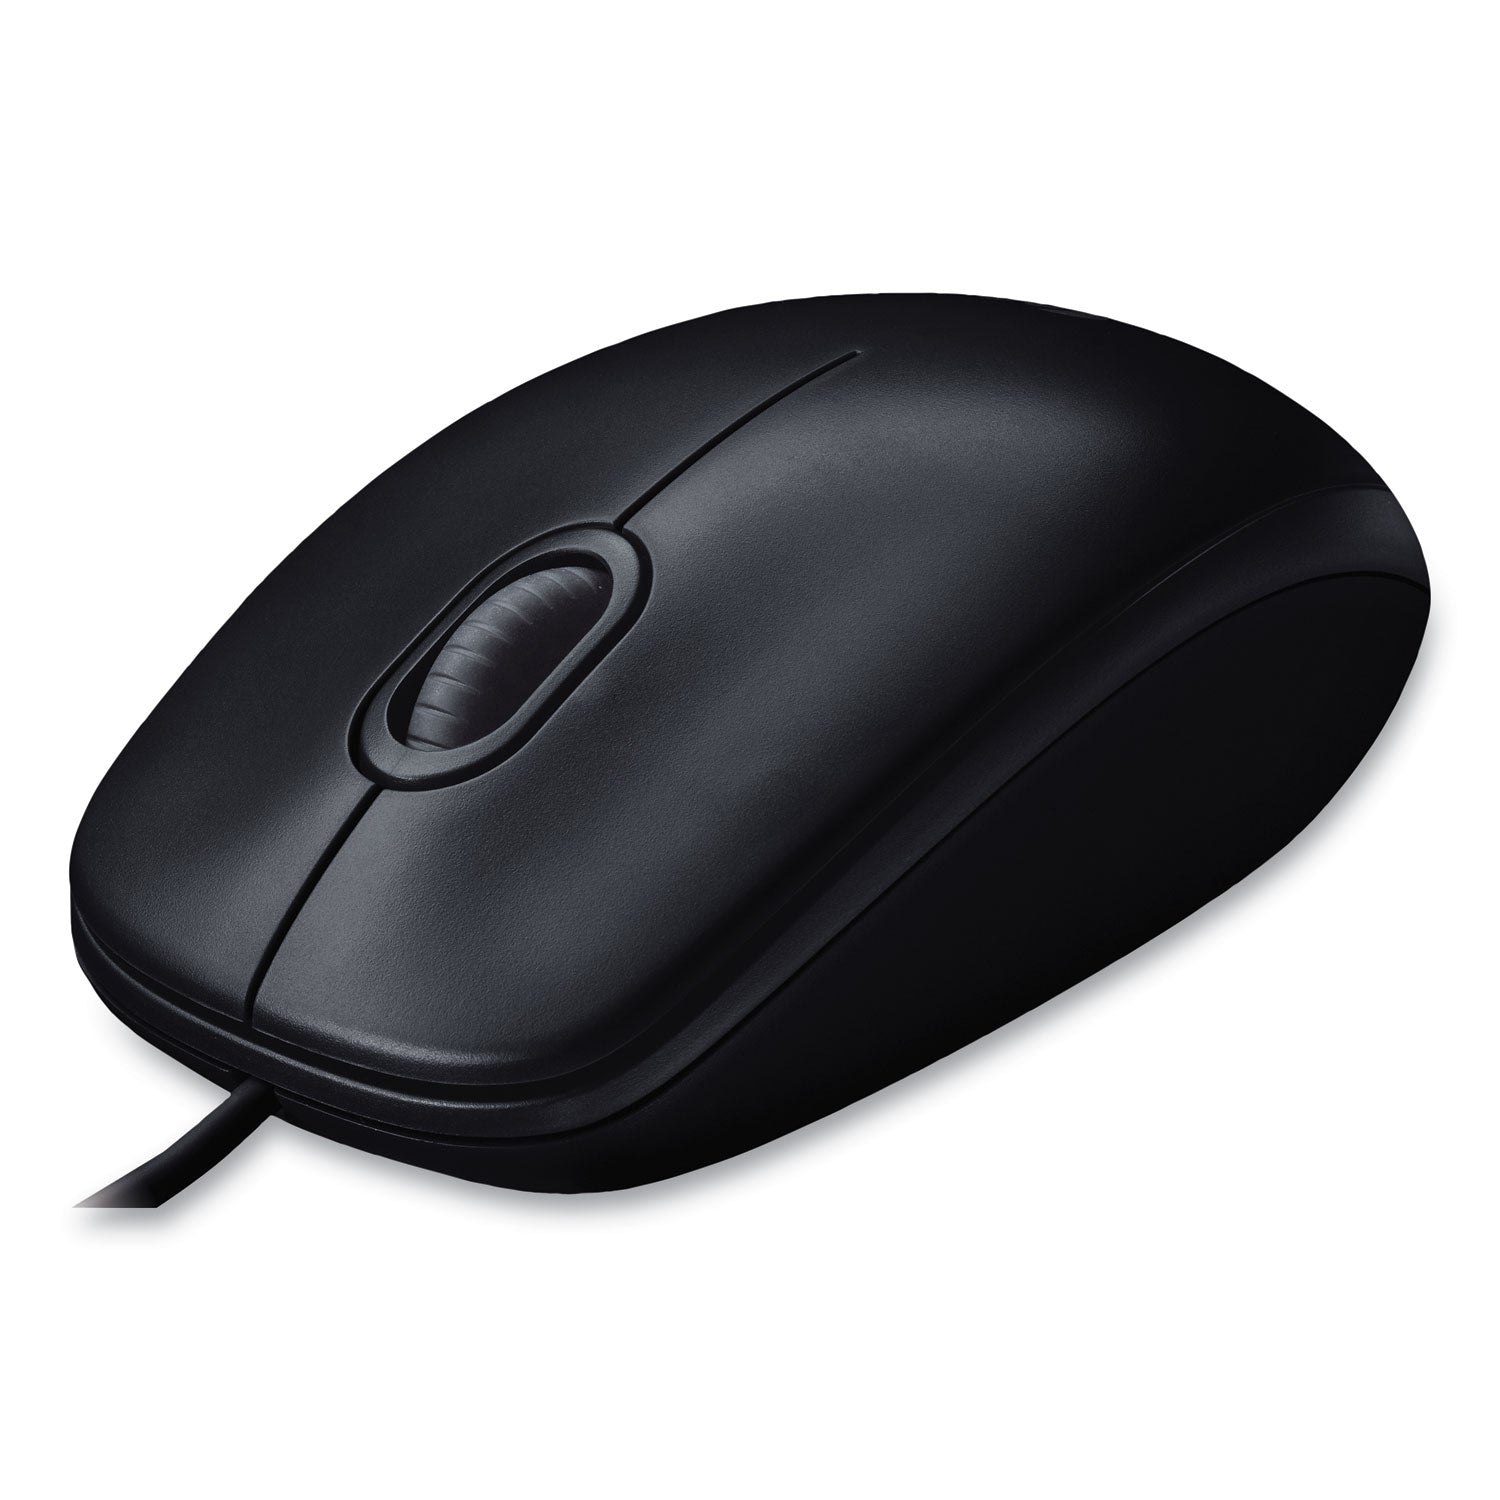 M100 Corded Optical Mouse, USB 2.0, Left/Right Hand Use, Black - 